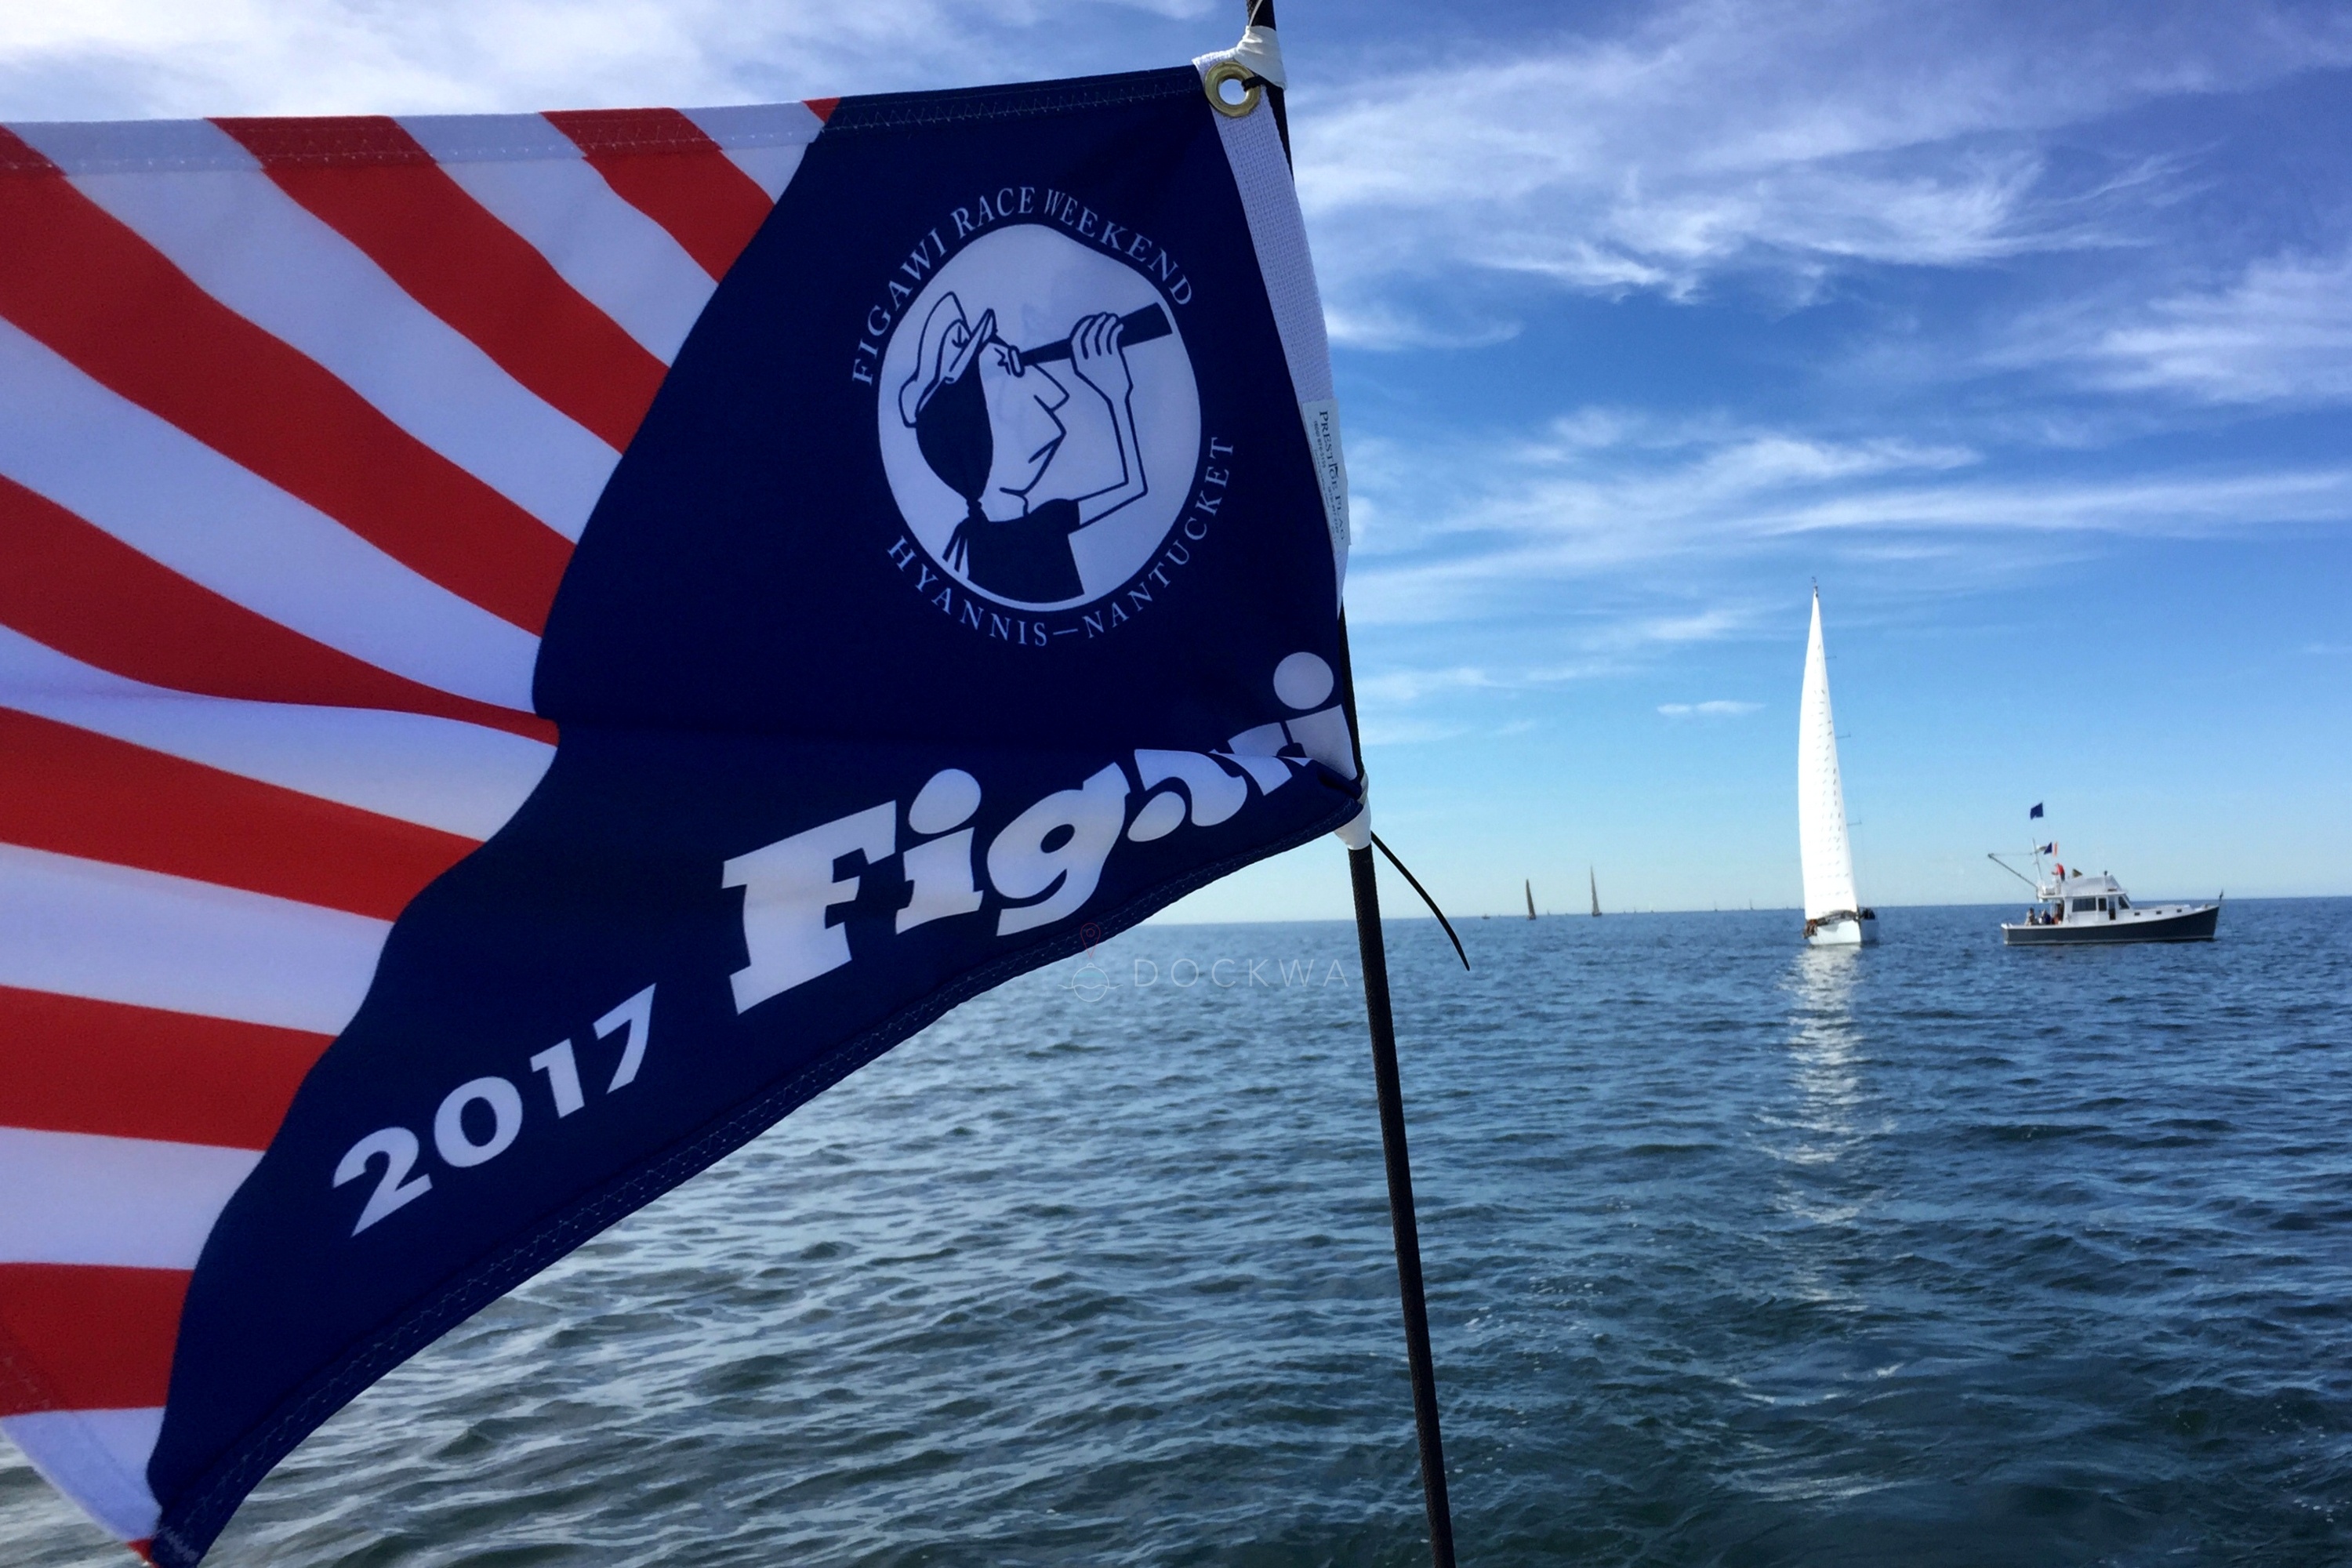 Figawi 2022 CheatSheet Your Guide to Surviving Hyannis and Nantucket